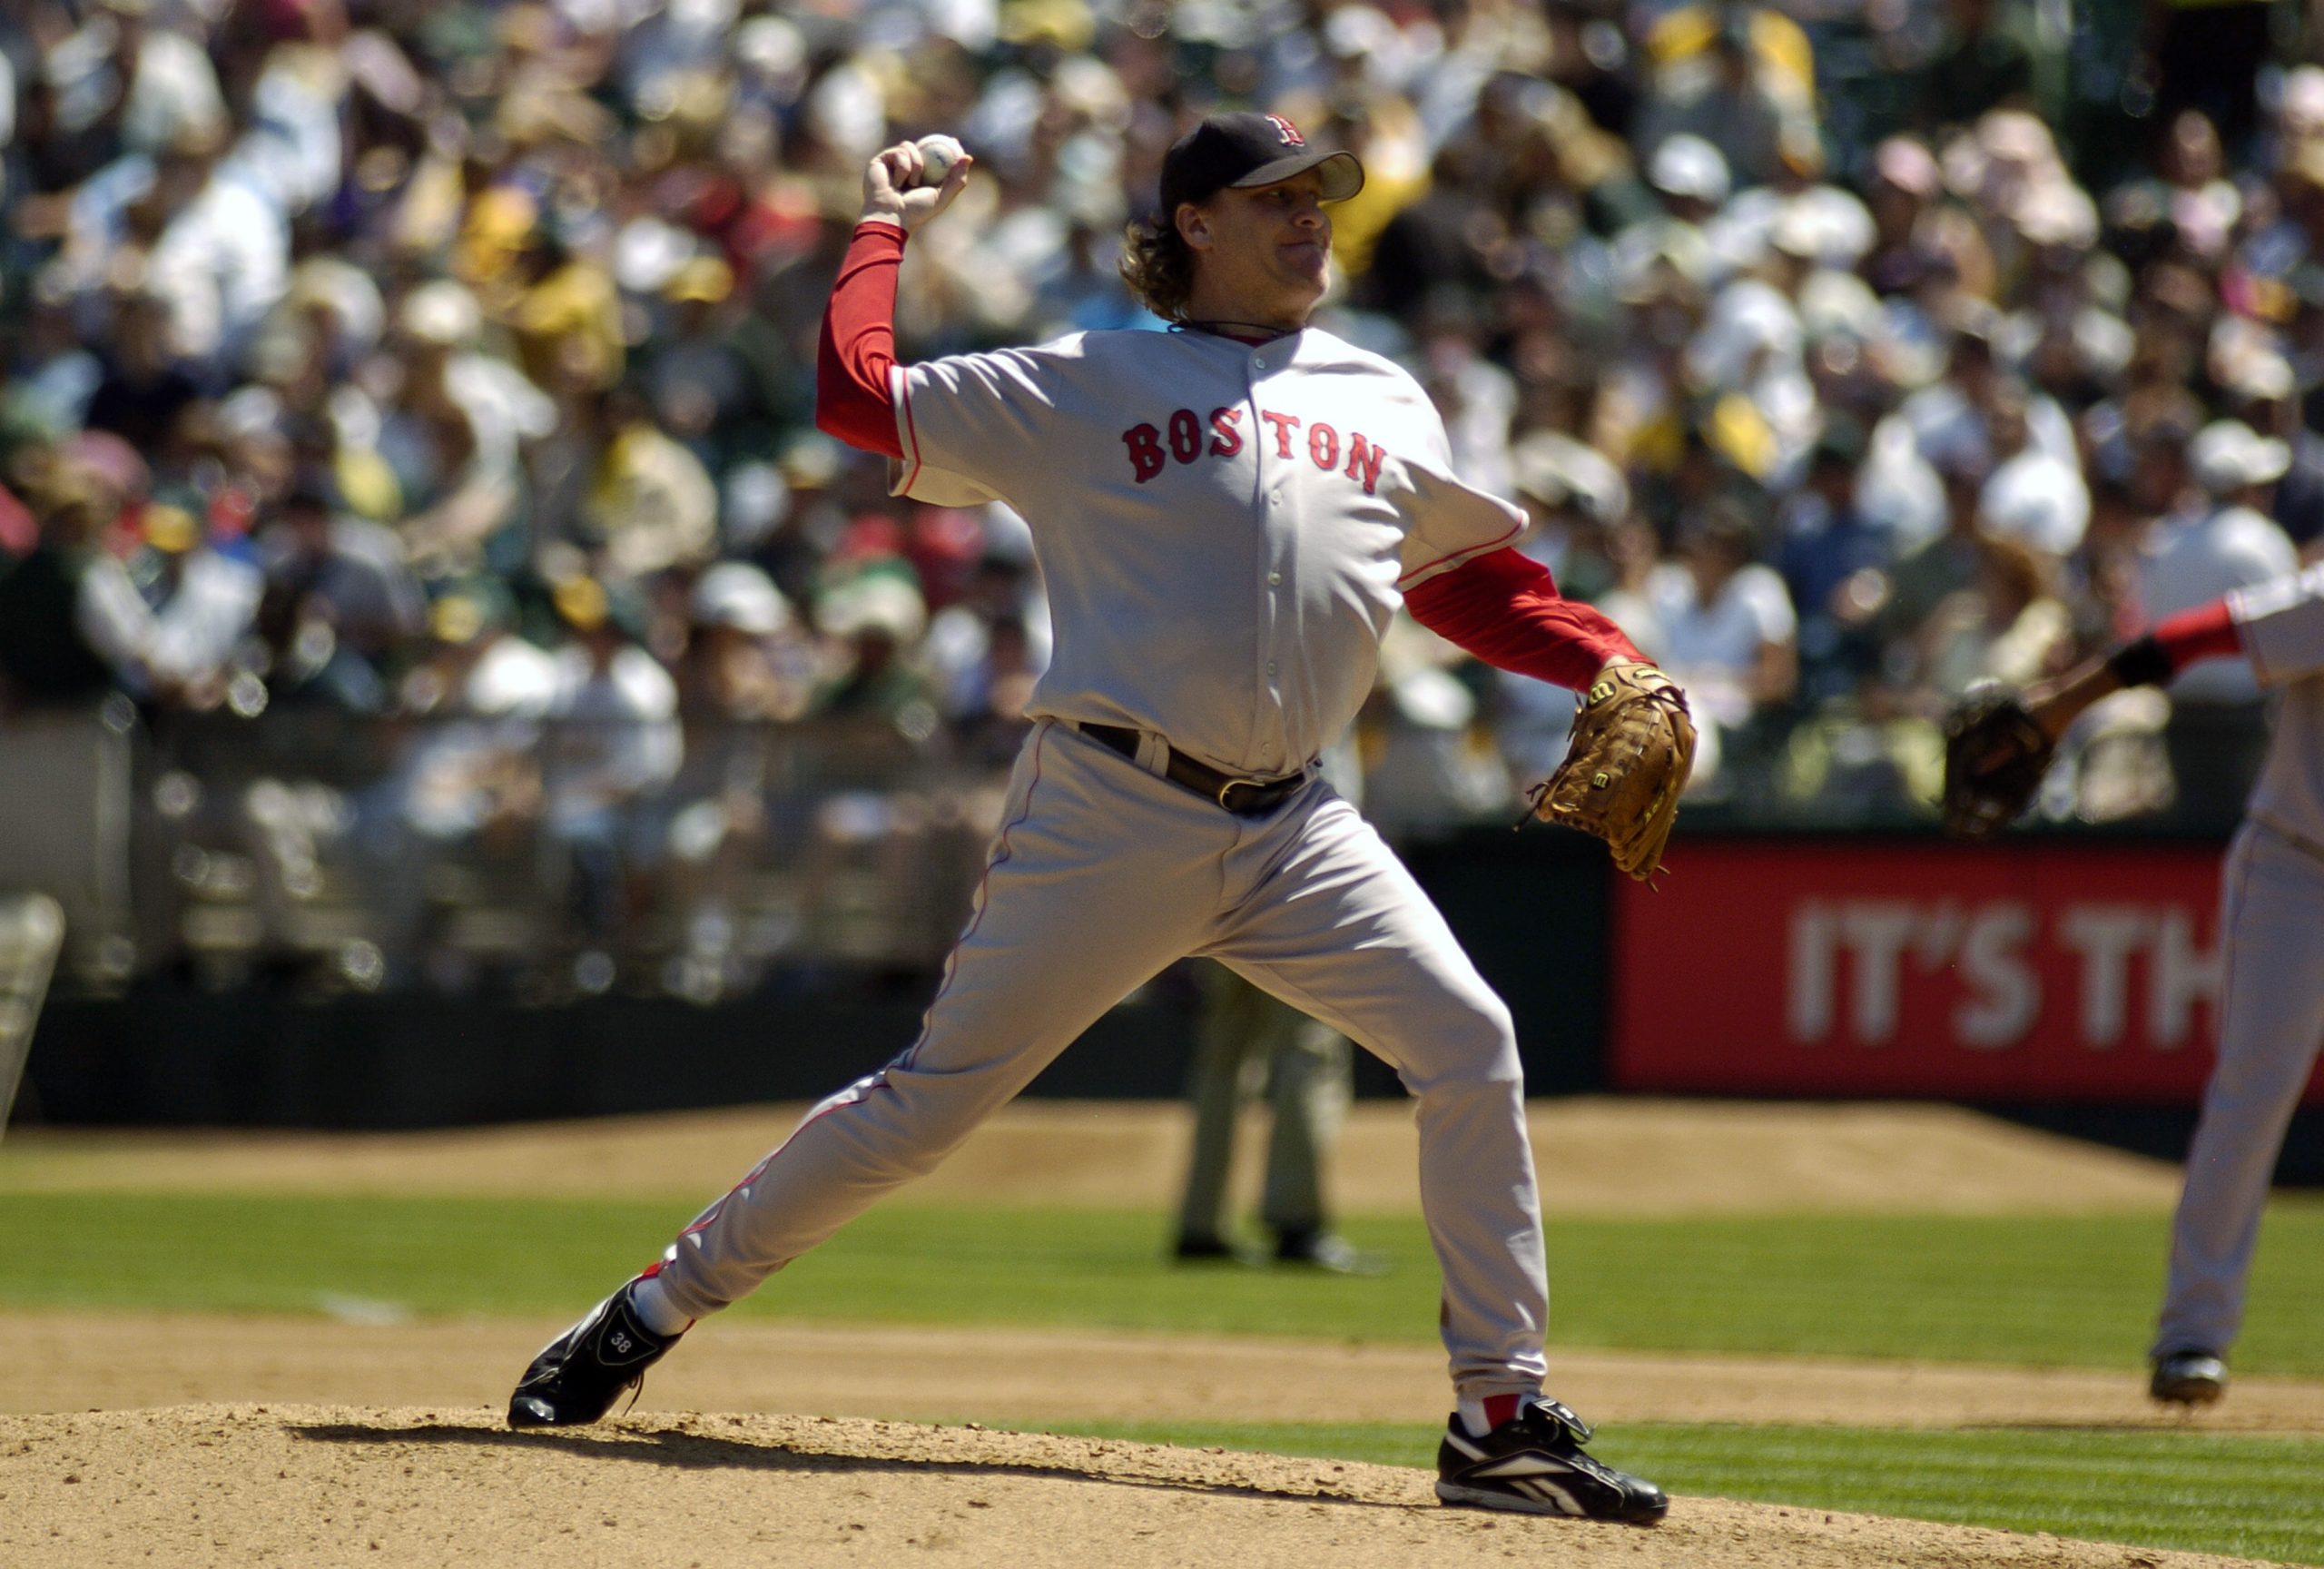 Curt Schilling of the Boston Red Sox pitches against the Oakland Athletics .